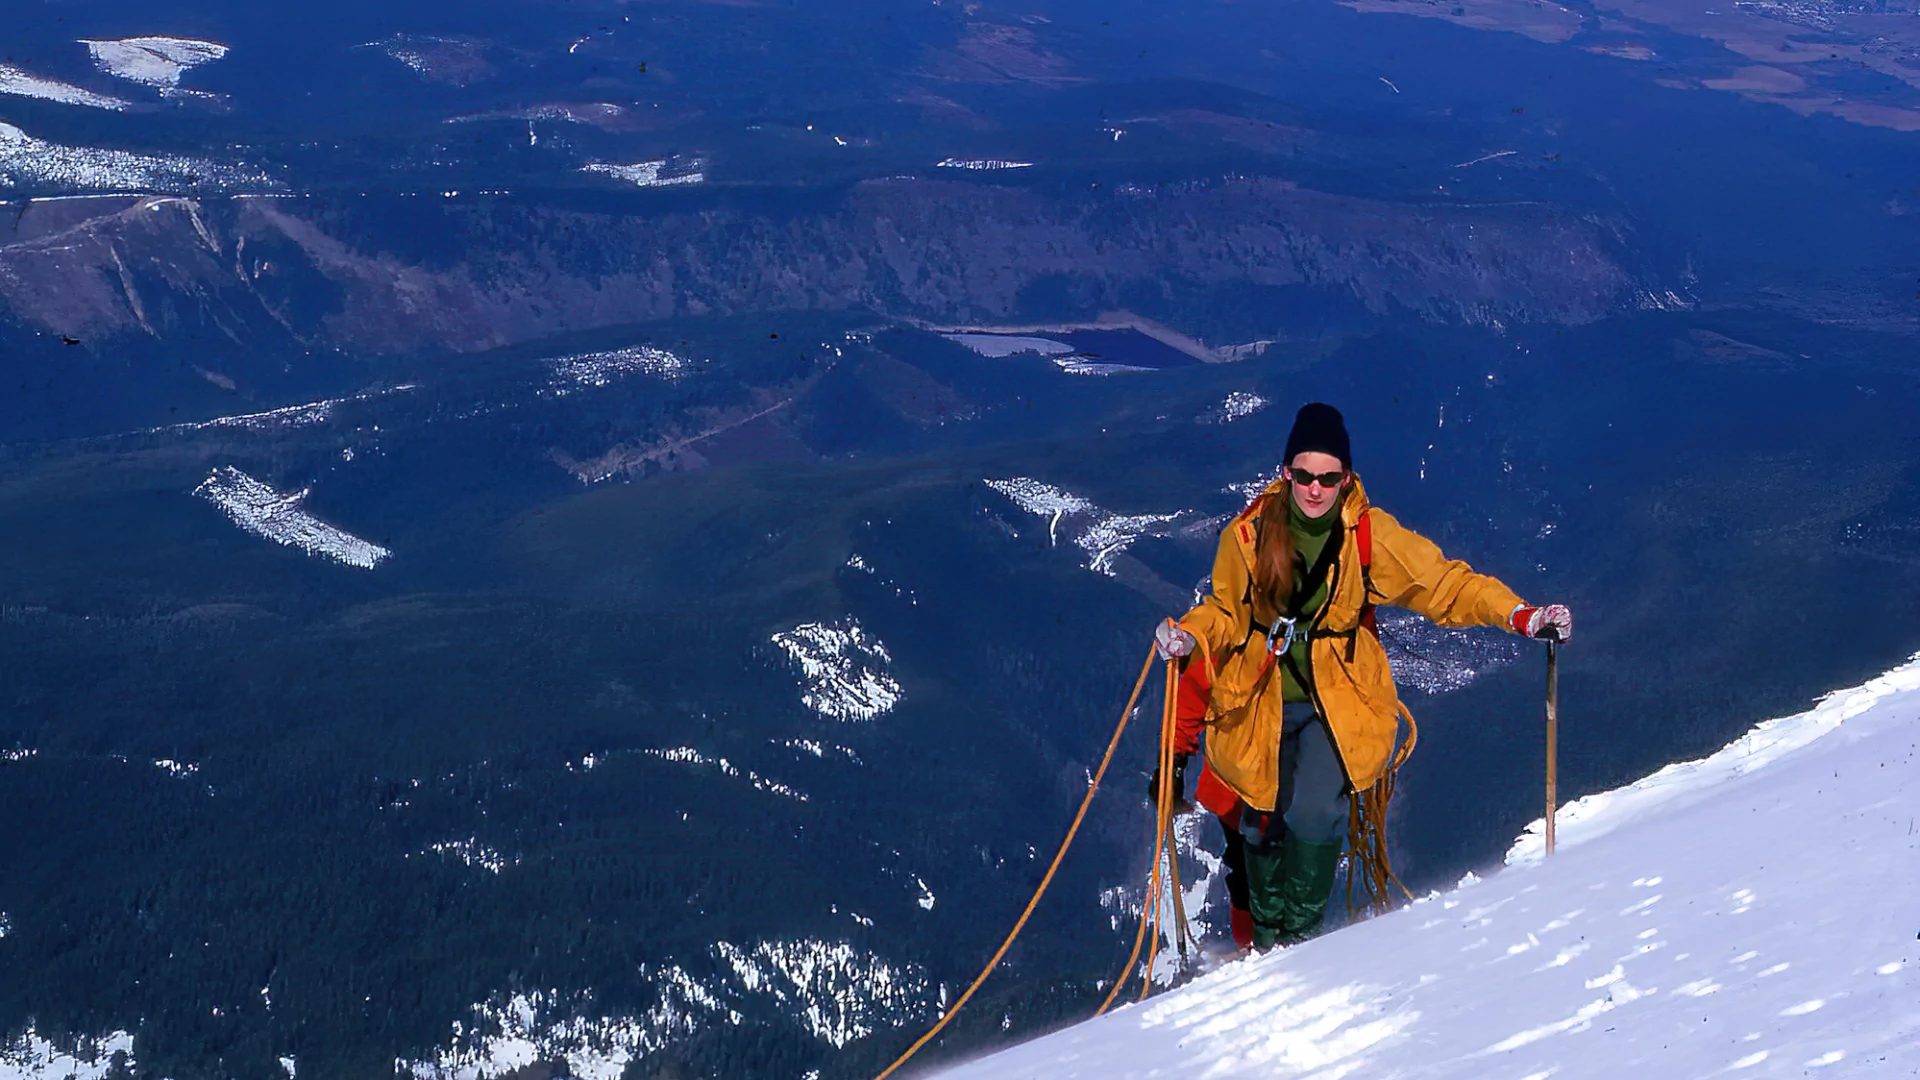 A mountaineer ascends mount hood